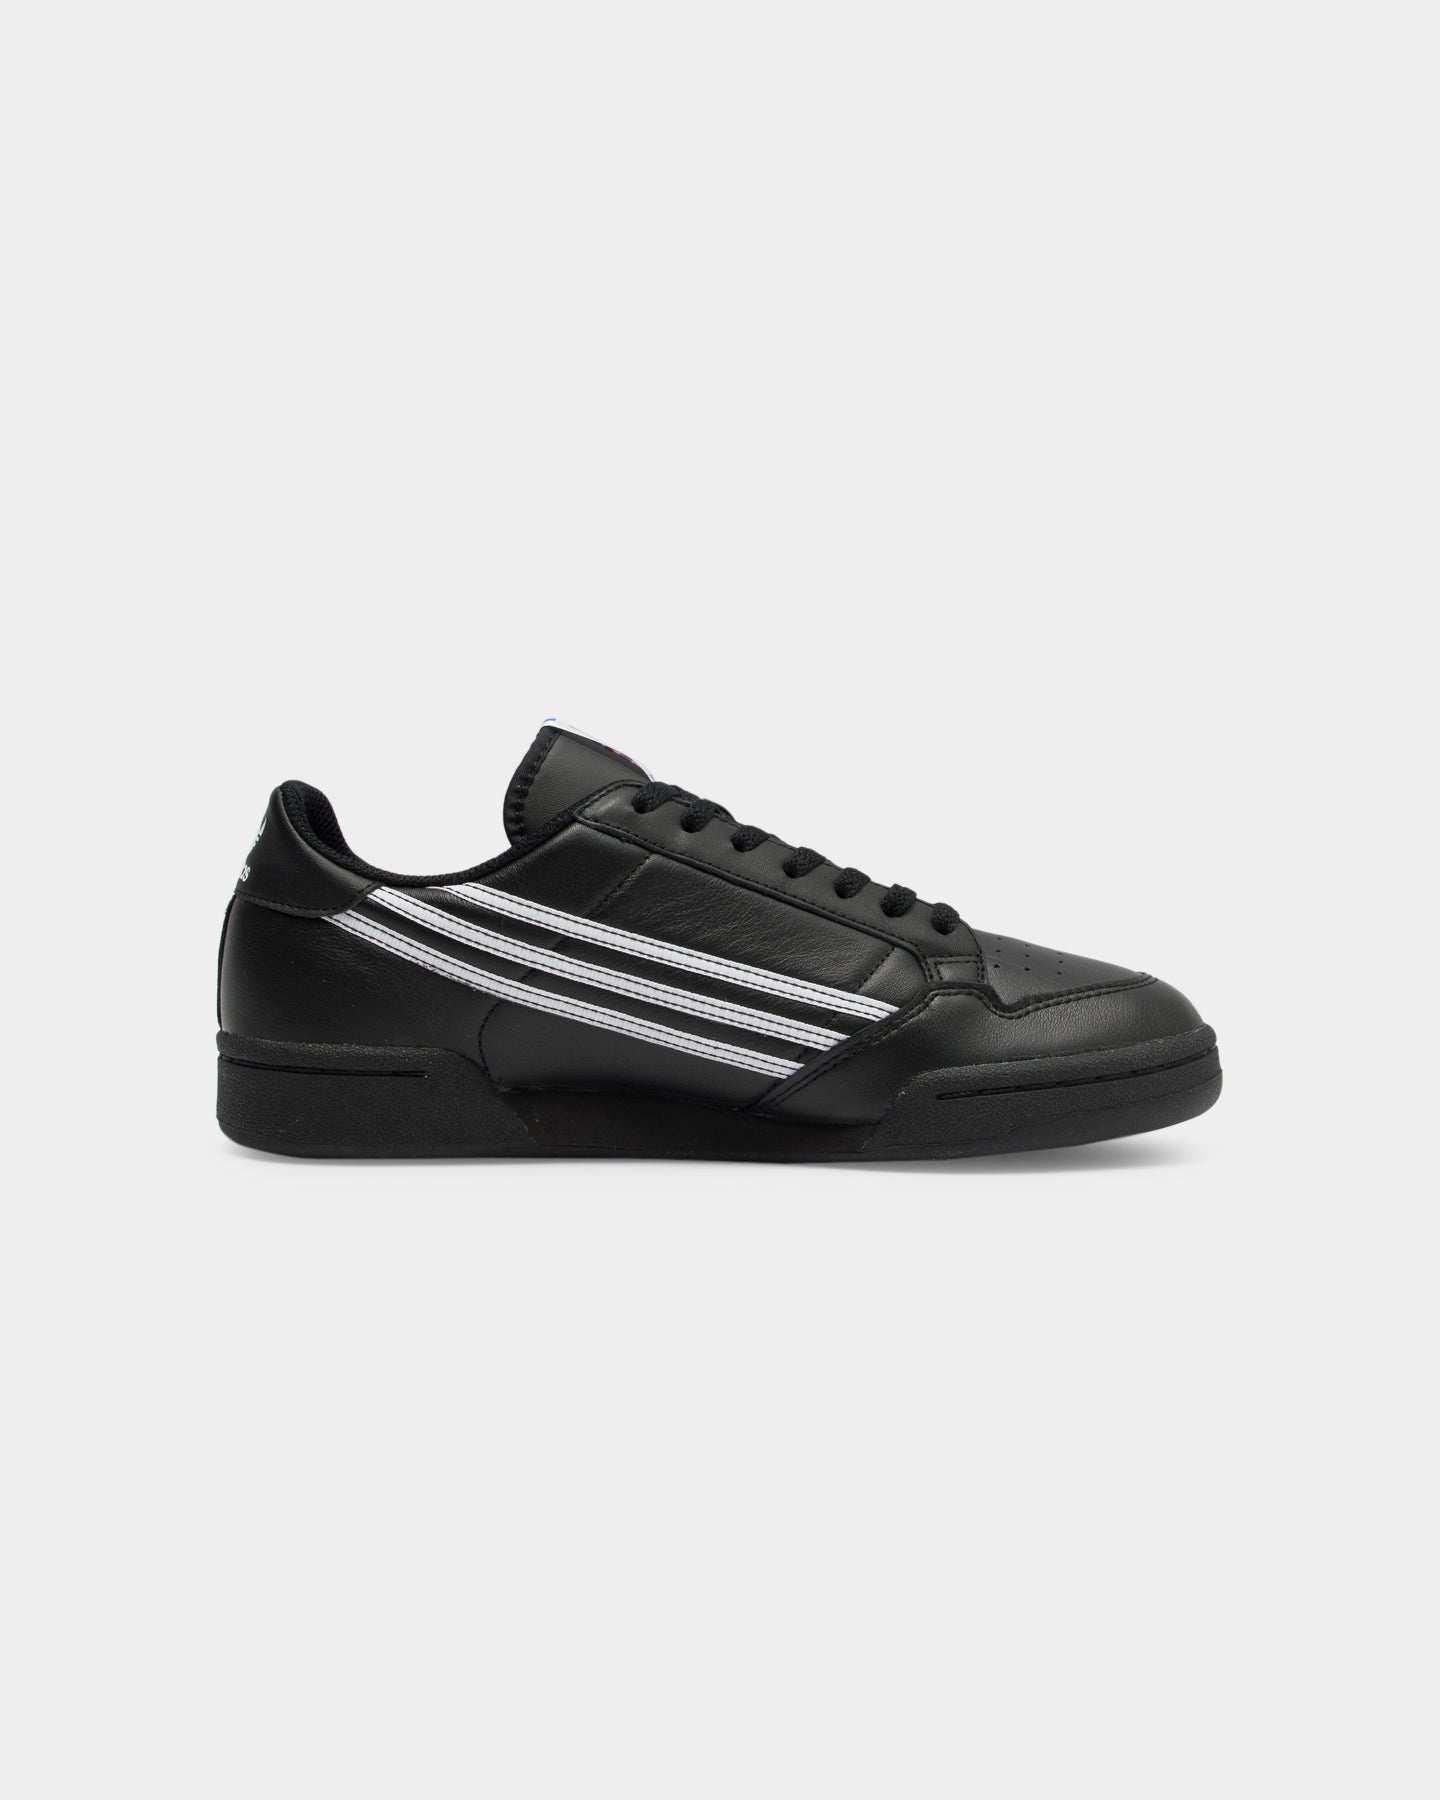 adidas continental 80 black and white